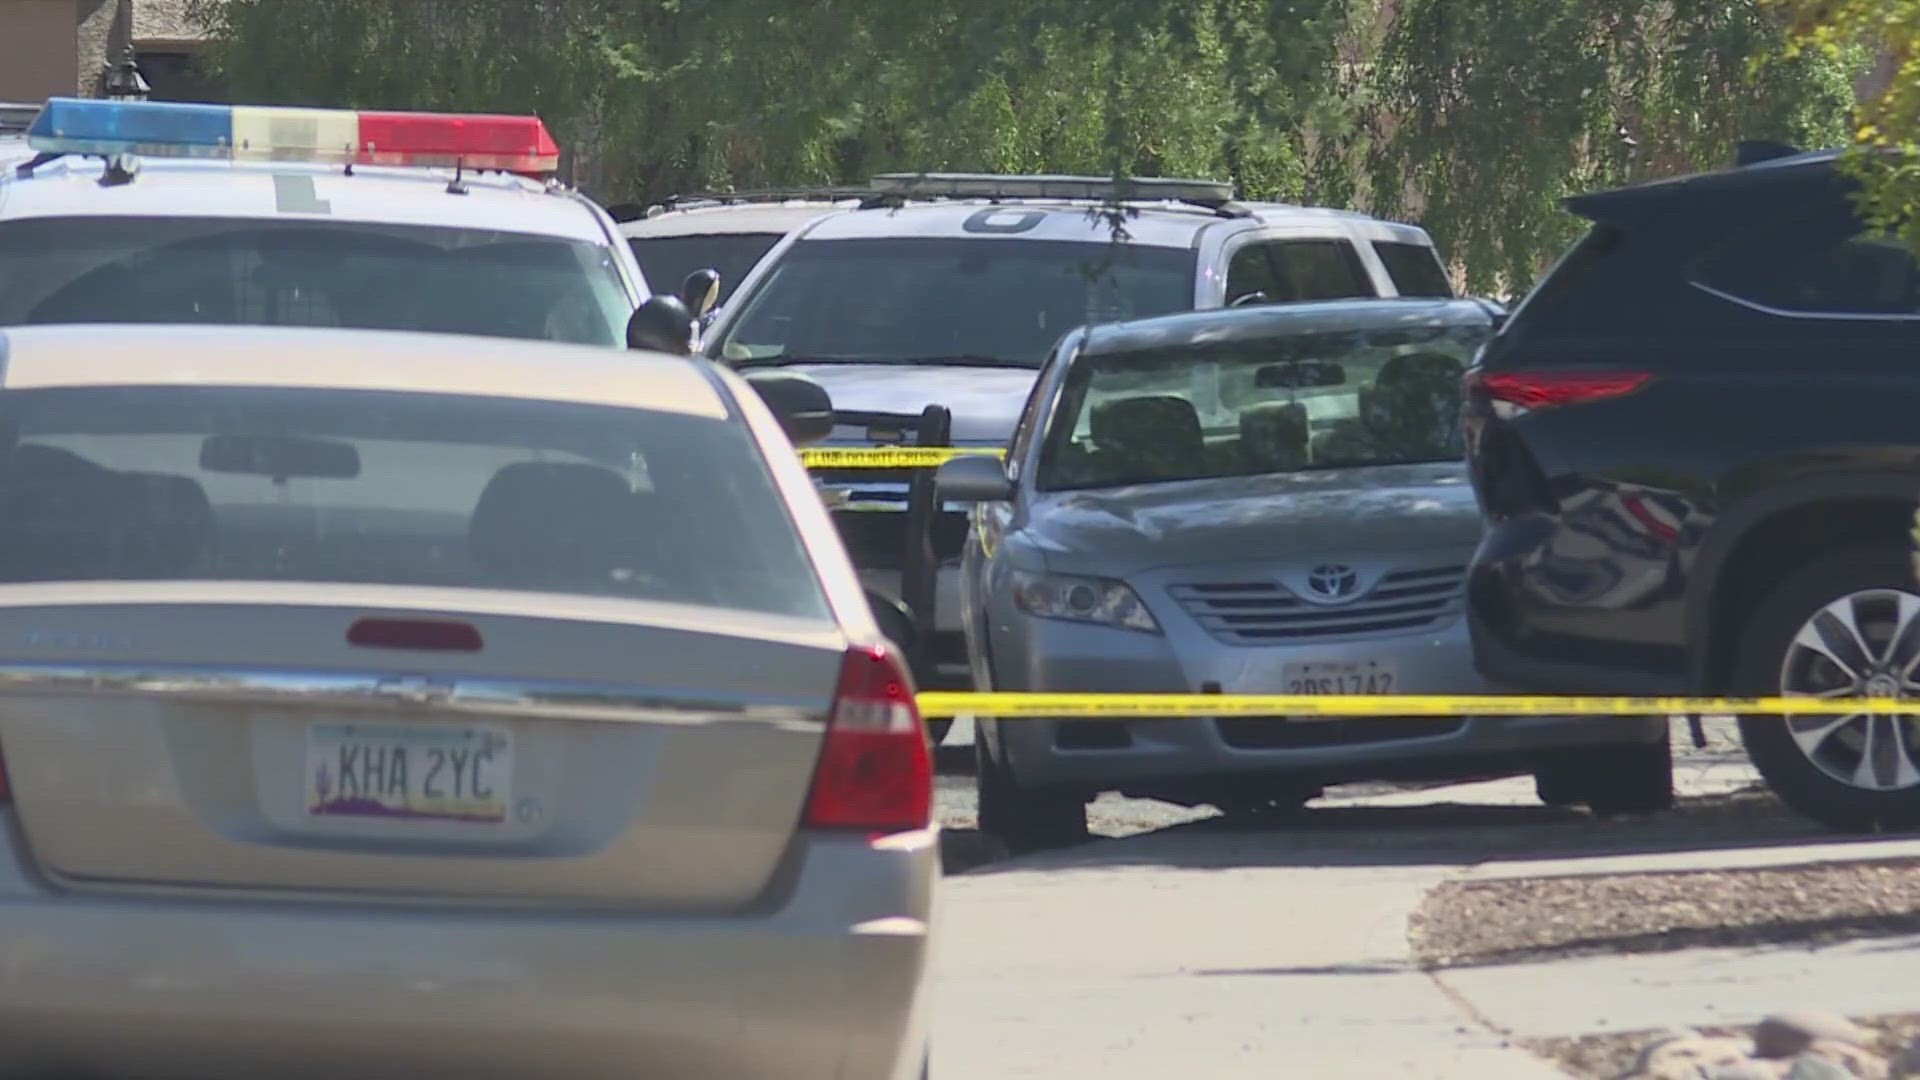 Phoenix Police said the 15-year-old girl was sleeping in her bed when she was shot by an unknown suspect.